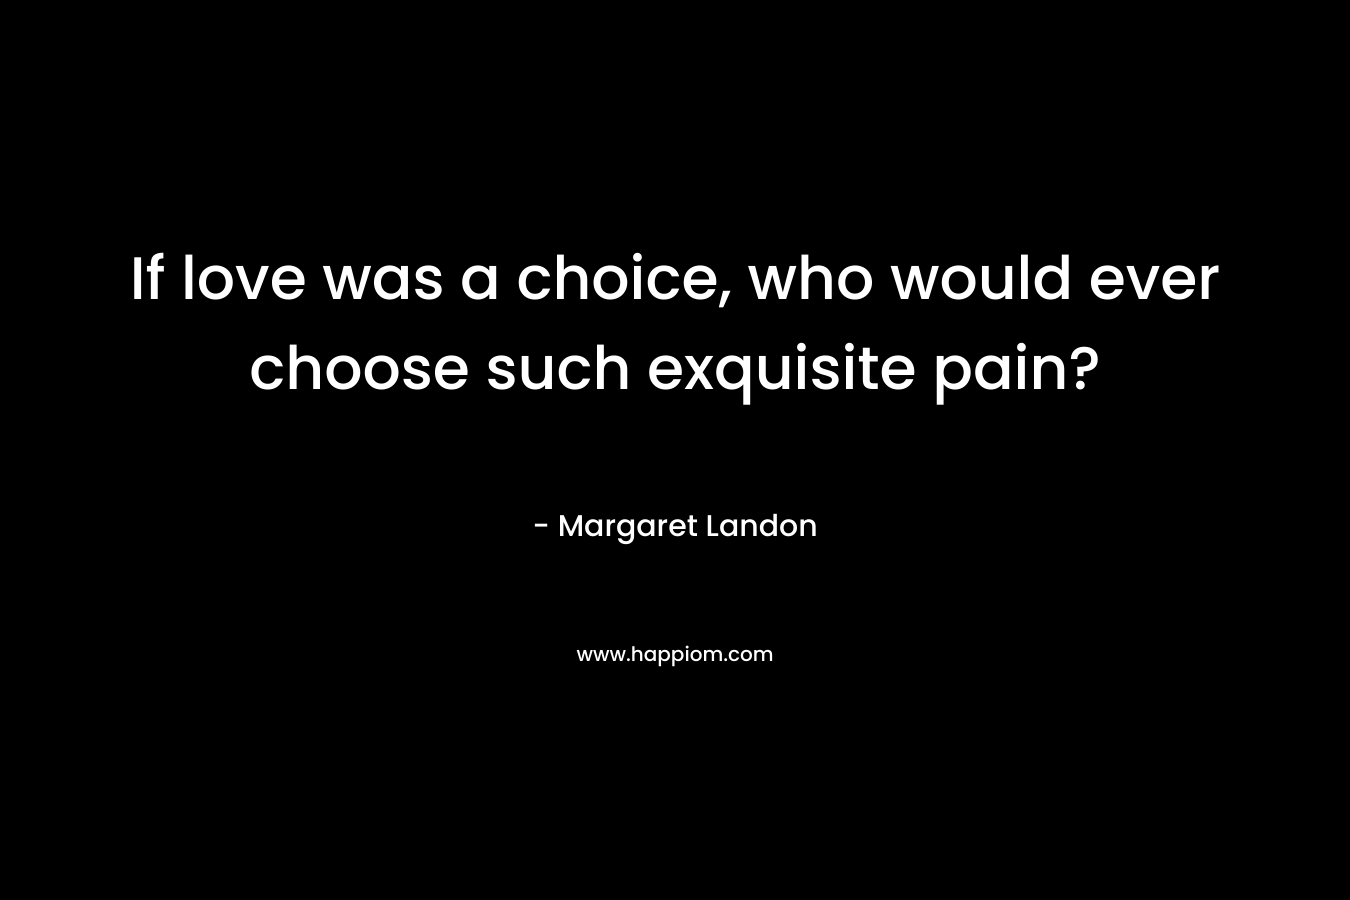 If love was a choice, who would ever choose such exquisite pain? – Margaret Landon